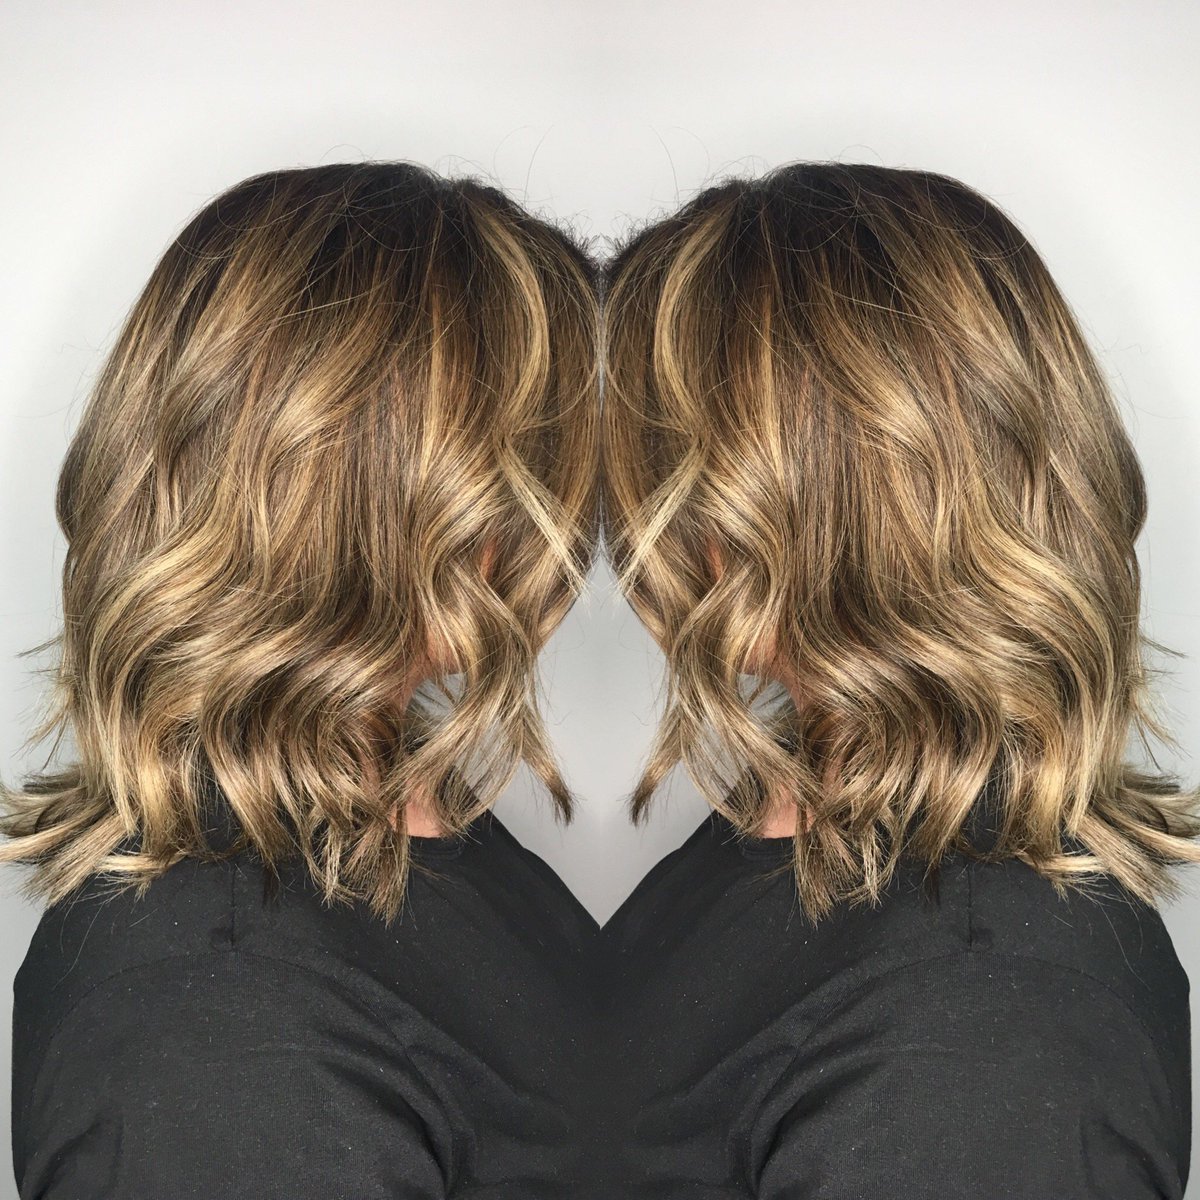 Beautiful balayage done by Ashleigh at our Dogsthorpe salon! ⭐️💗 #balayage #highlights #darkroots #curlyhair #hairenvy #peterborough #lorealpro